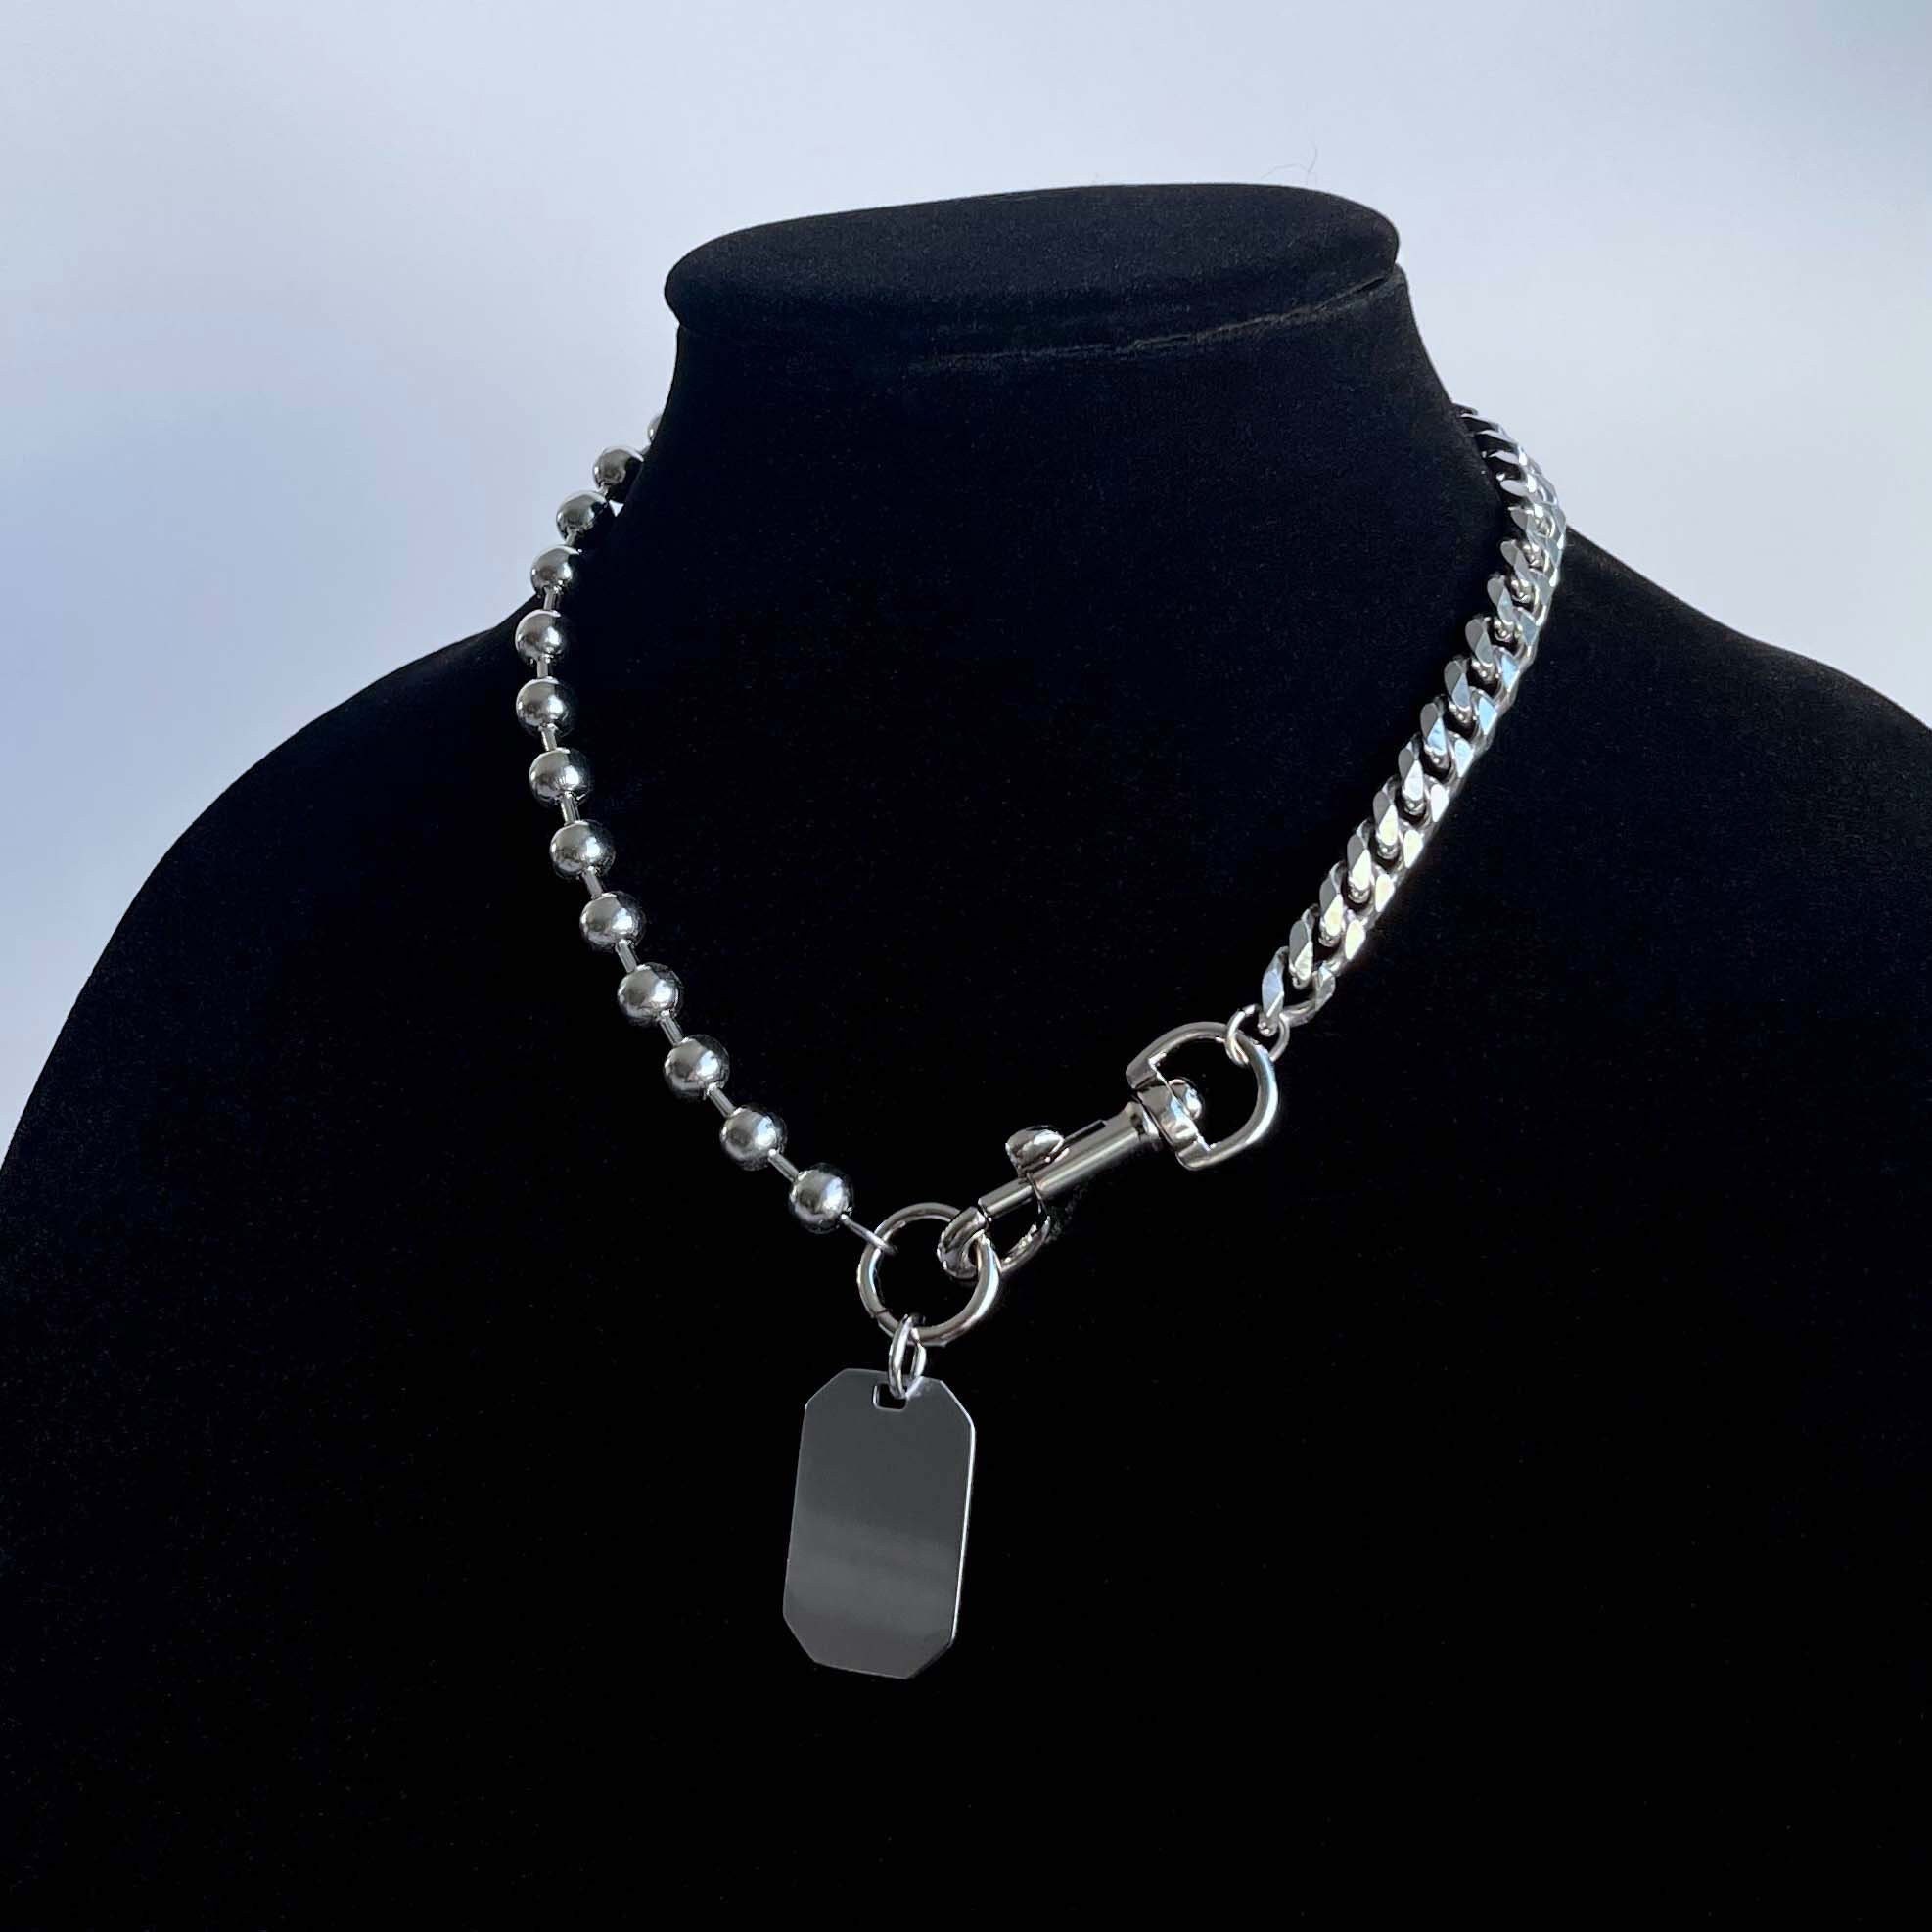 Men's Black Chain Necklace - Thick Box Chain Necklace 3.5mm - Waterproof  Chain - Stainless Steel Chain - Black Jewelry by Modern Out